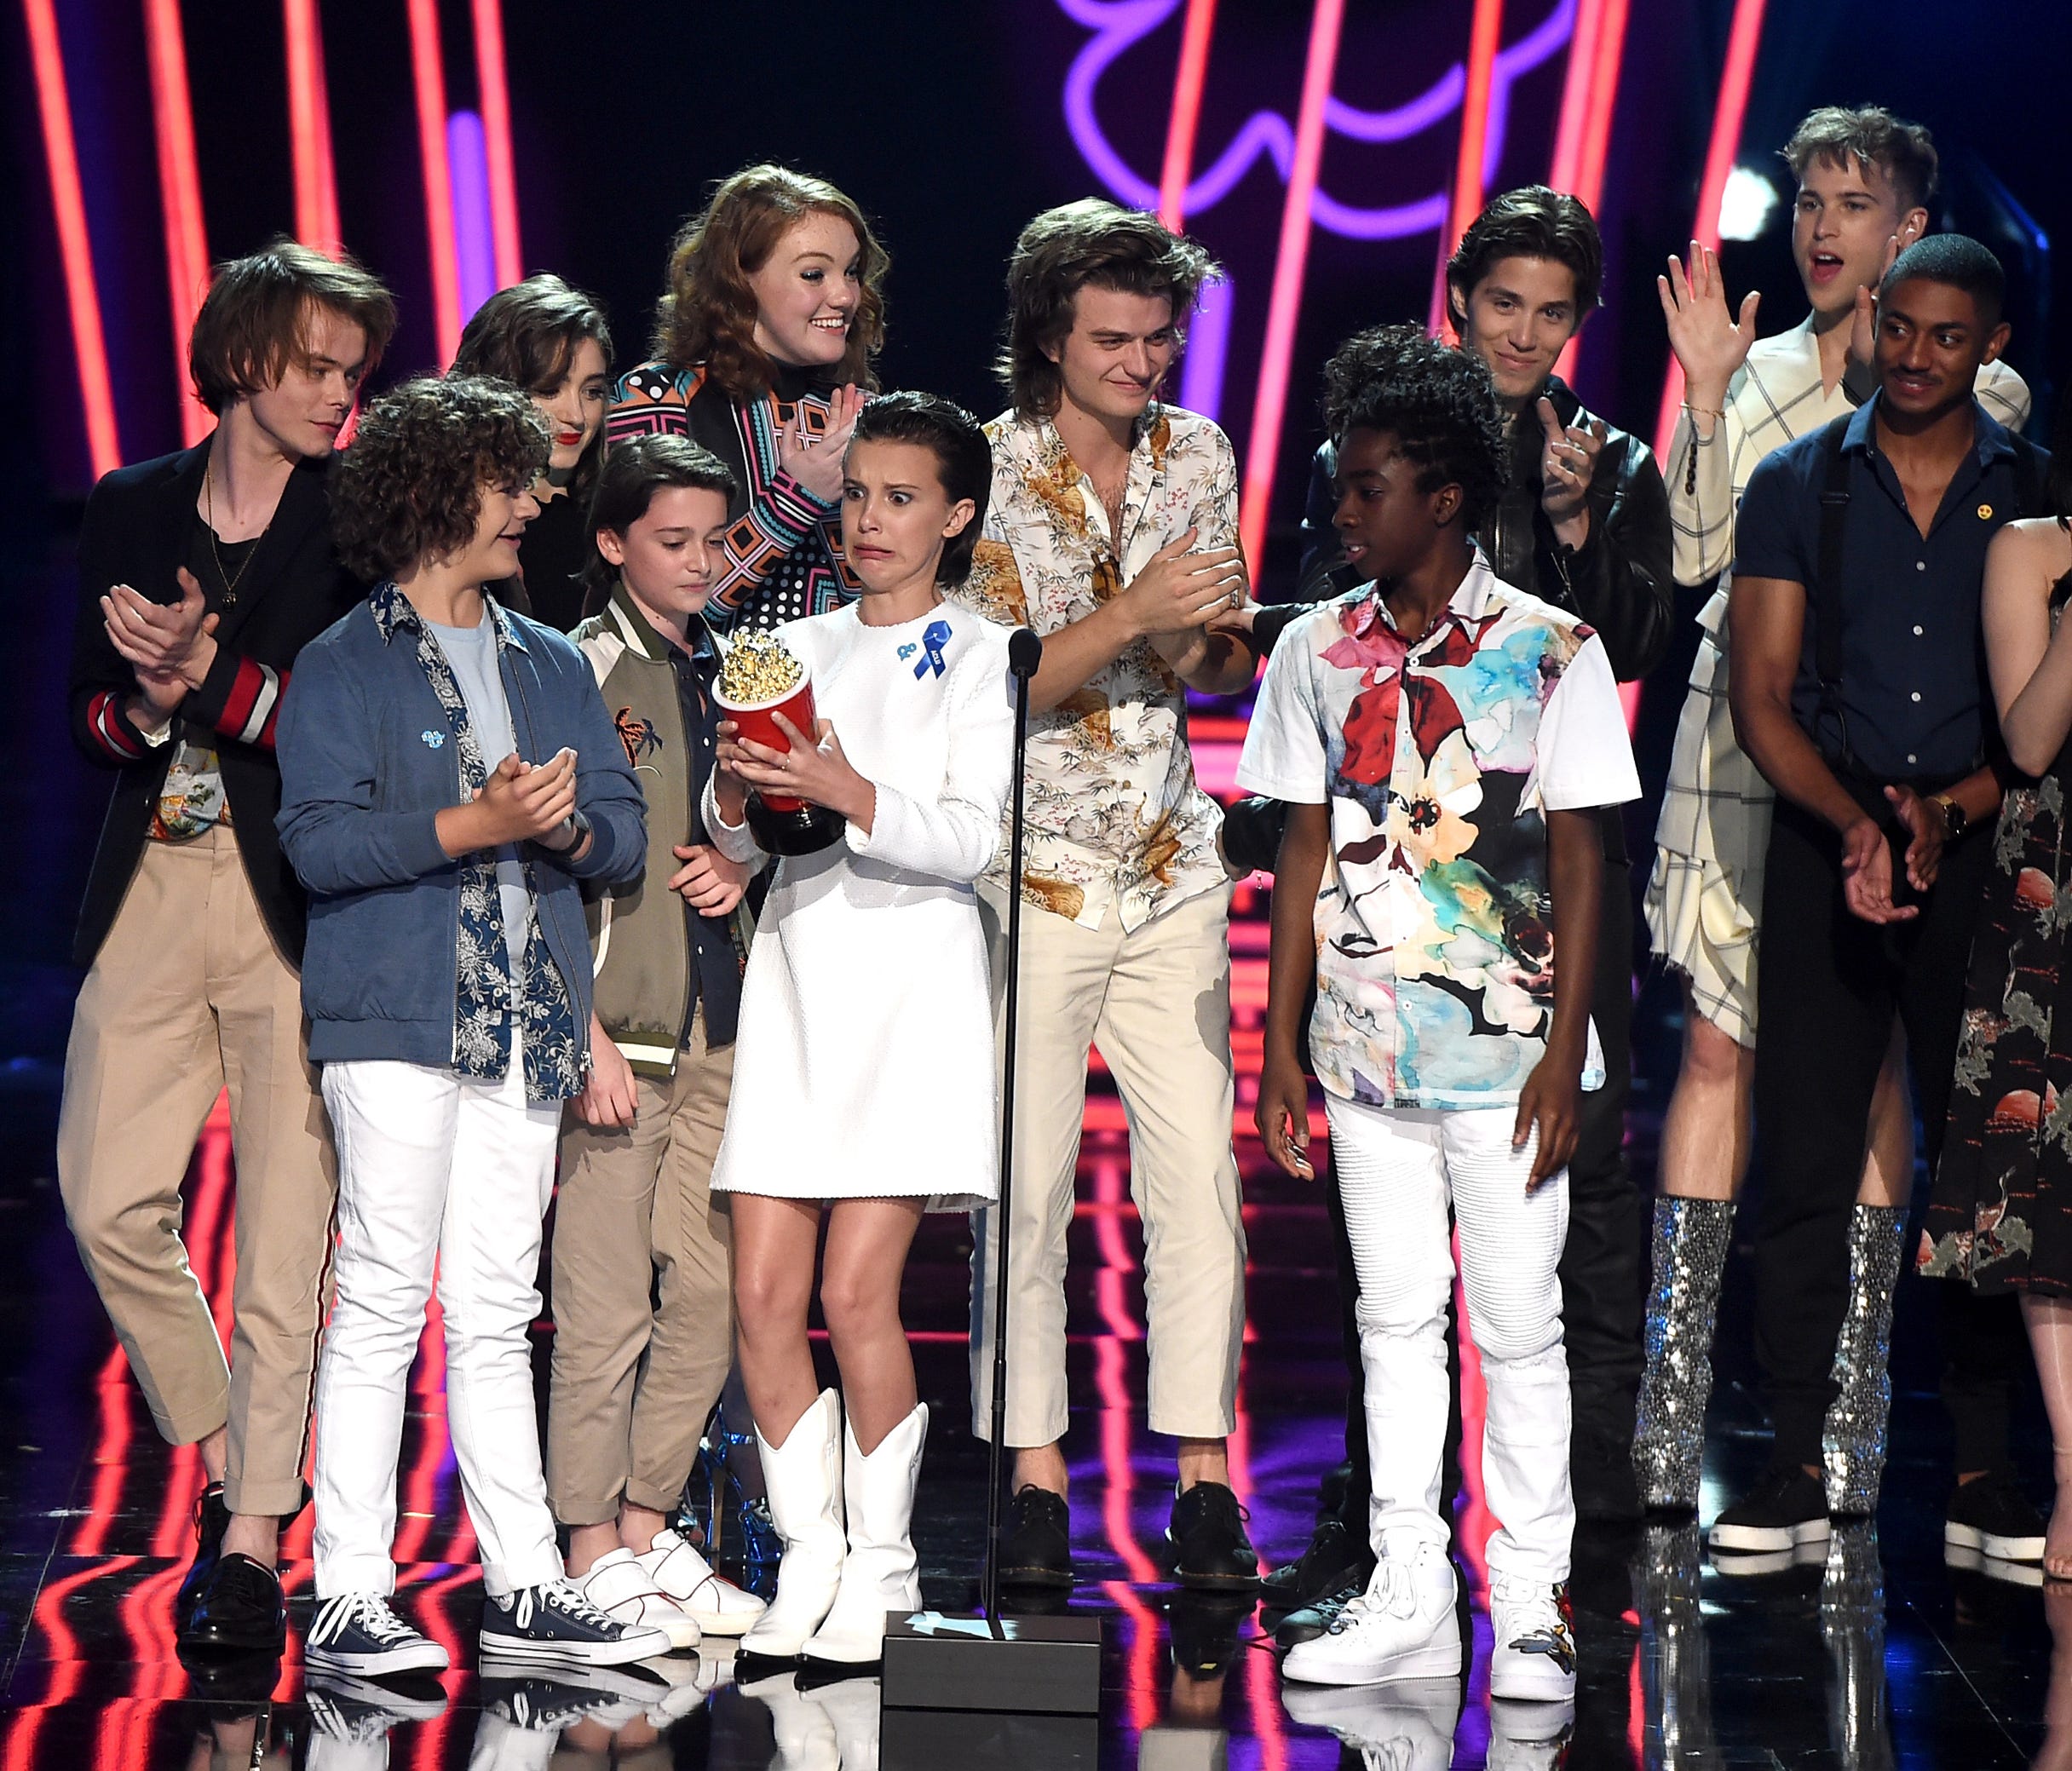 The cast of 'Stranger Things' win for Best Show, accepting the golden popcorn from the cast of '13 Reasons Why.'